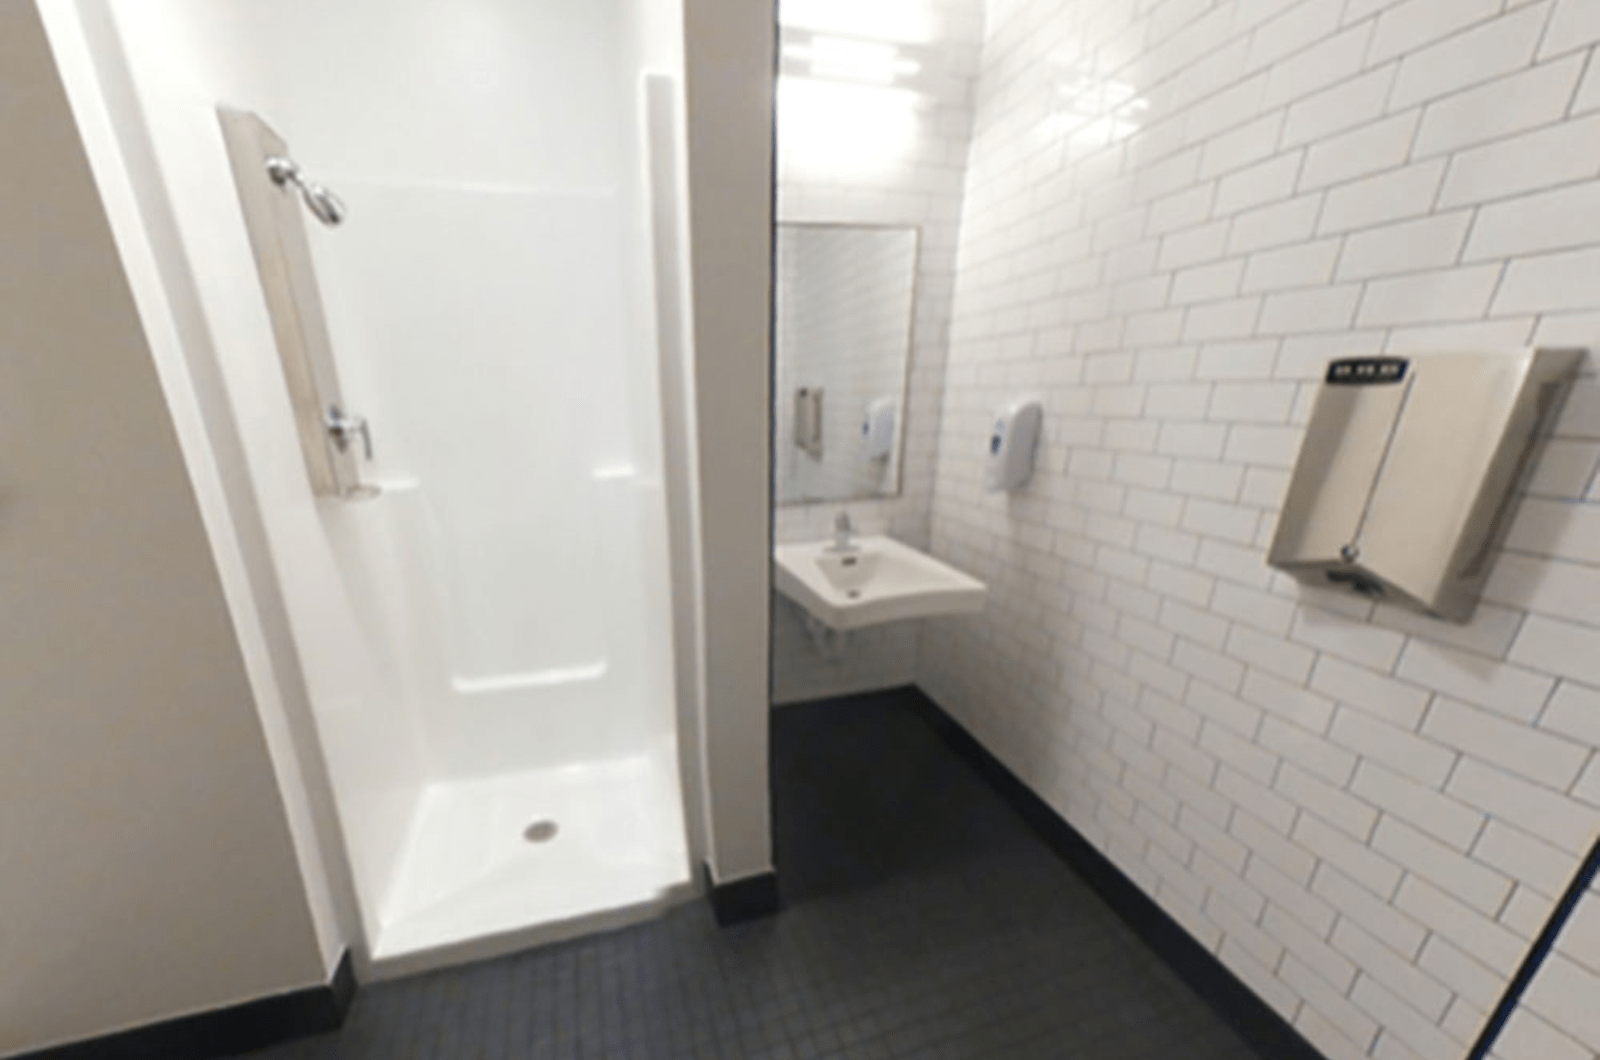 inside private bathroom with shower and sink visible